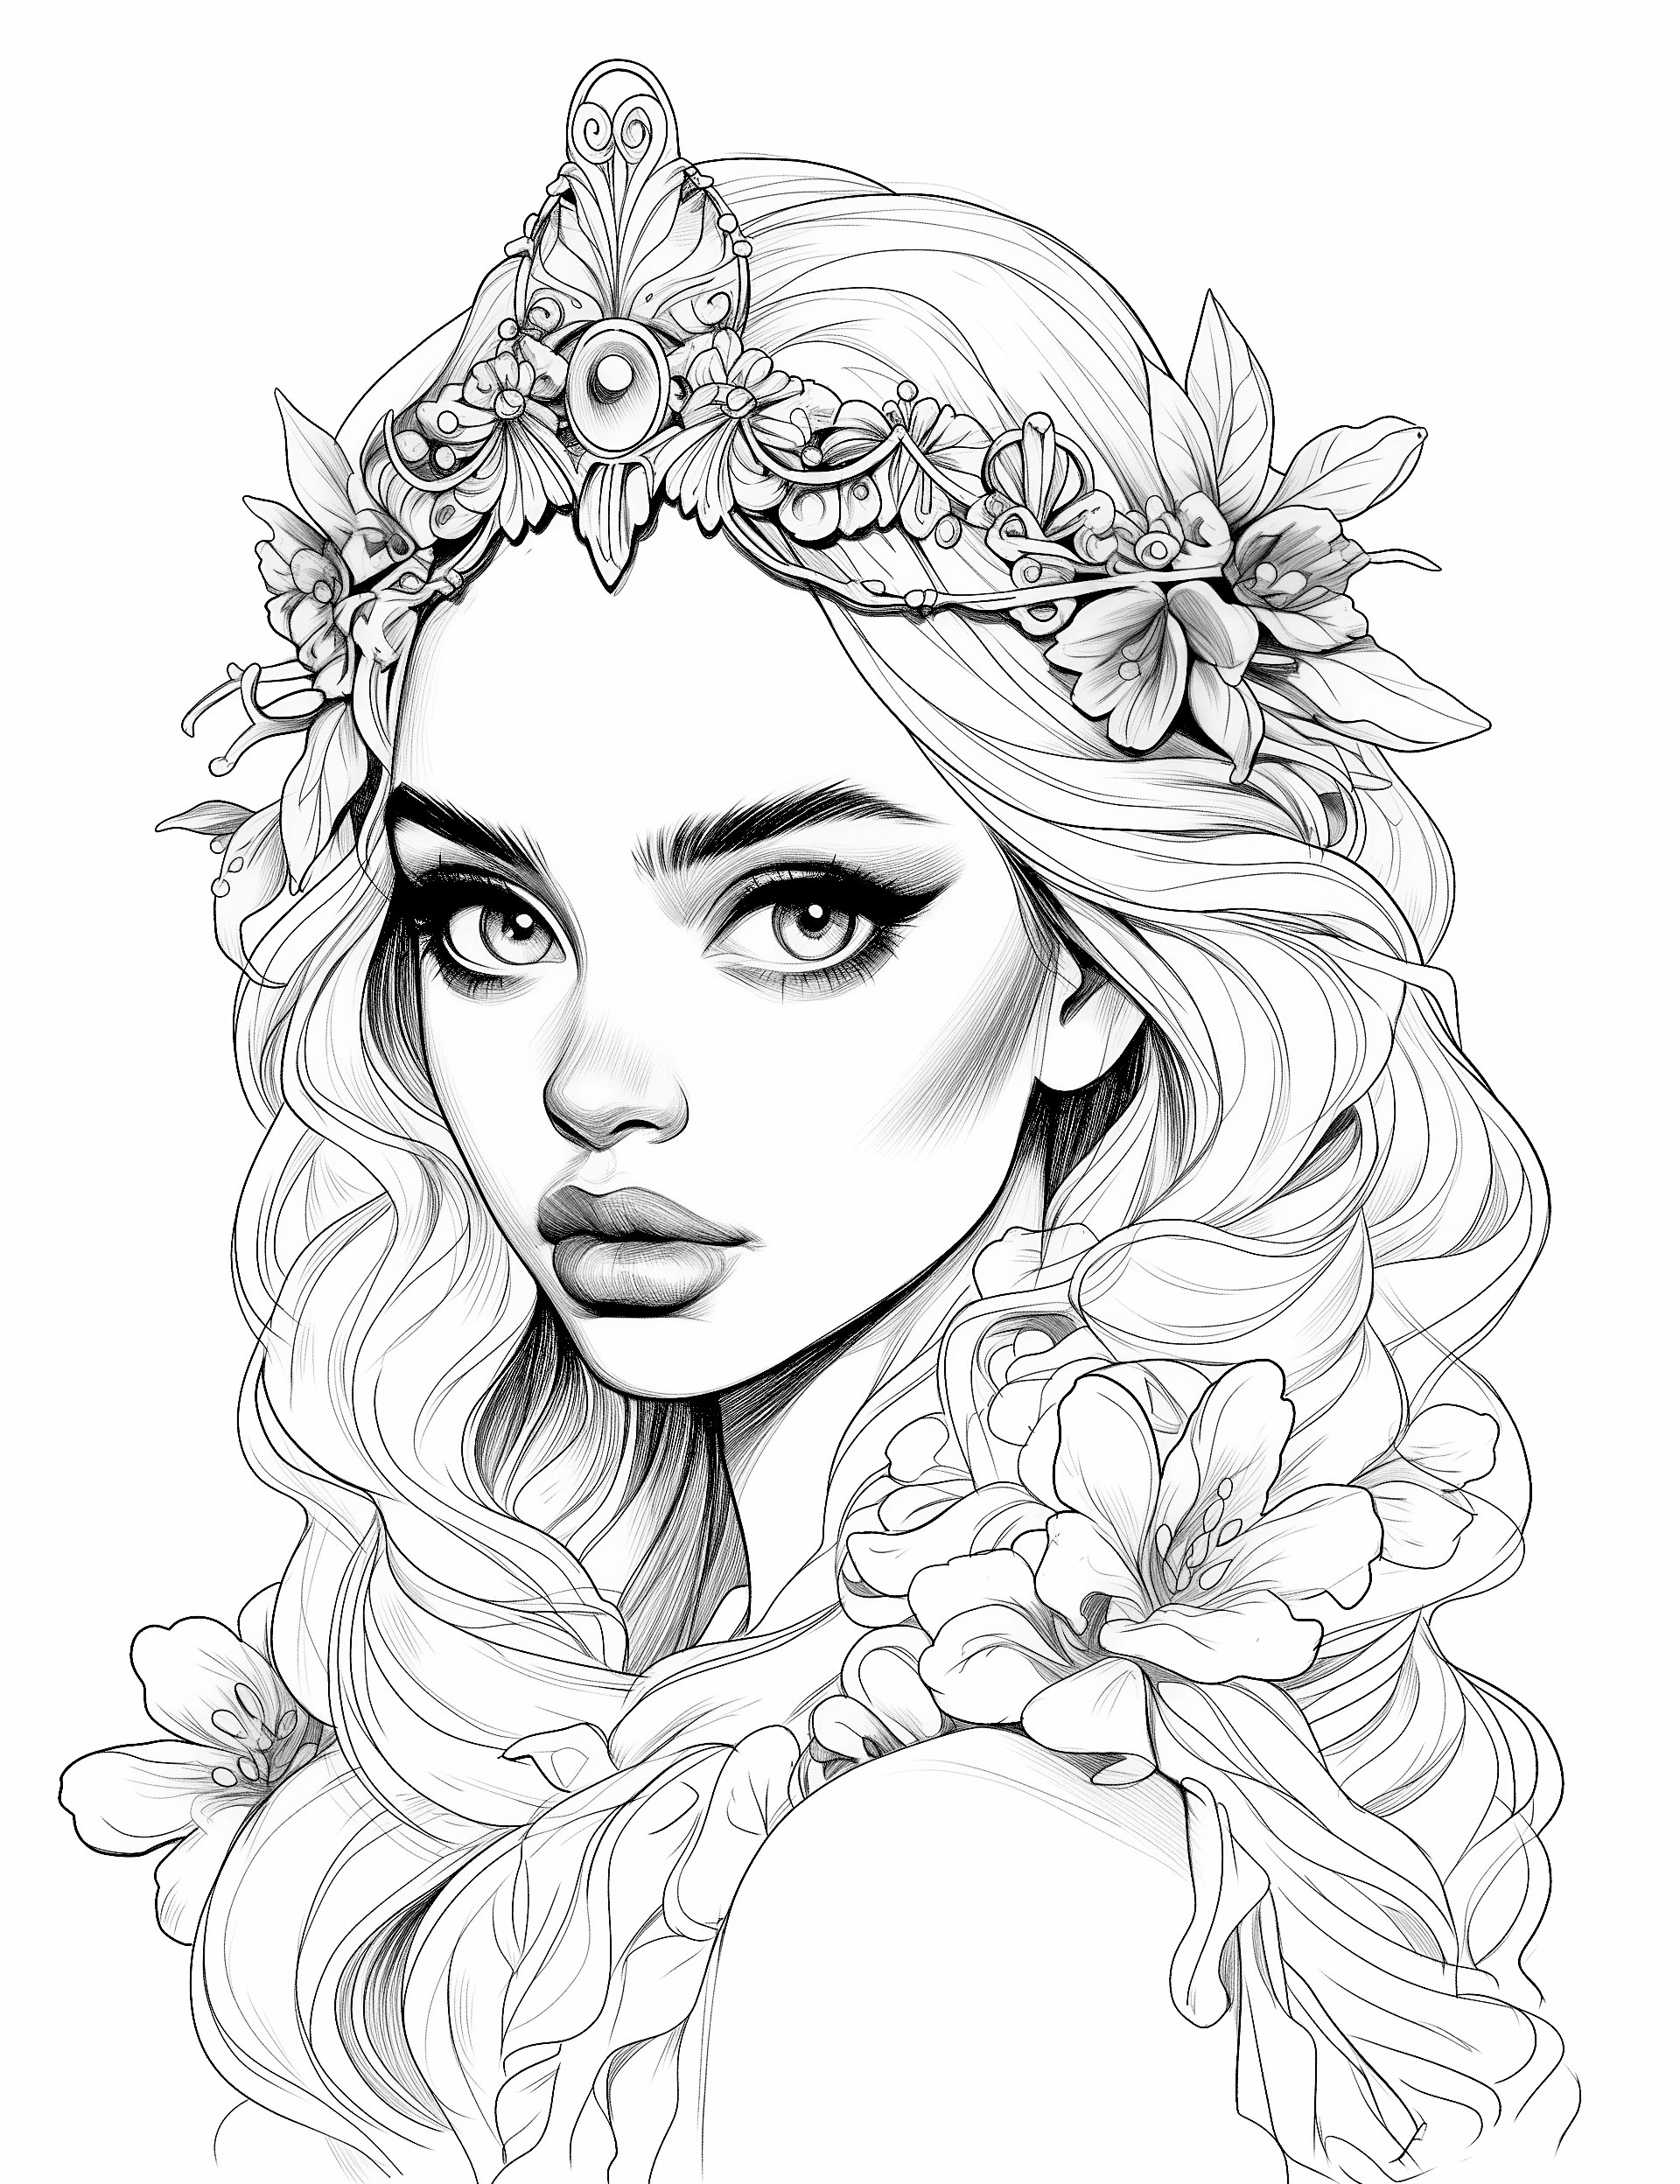 37 Stunning Crown Coloring Pages For Kids And Adults - Our Mindful Life